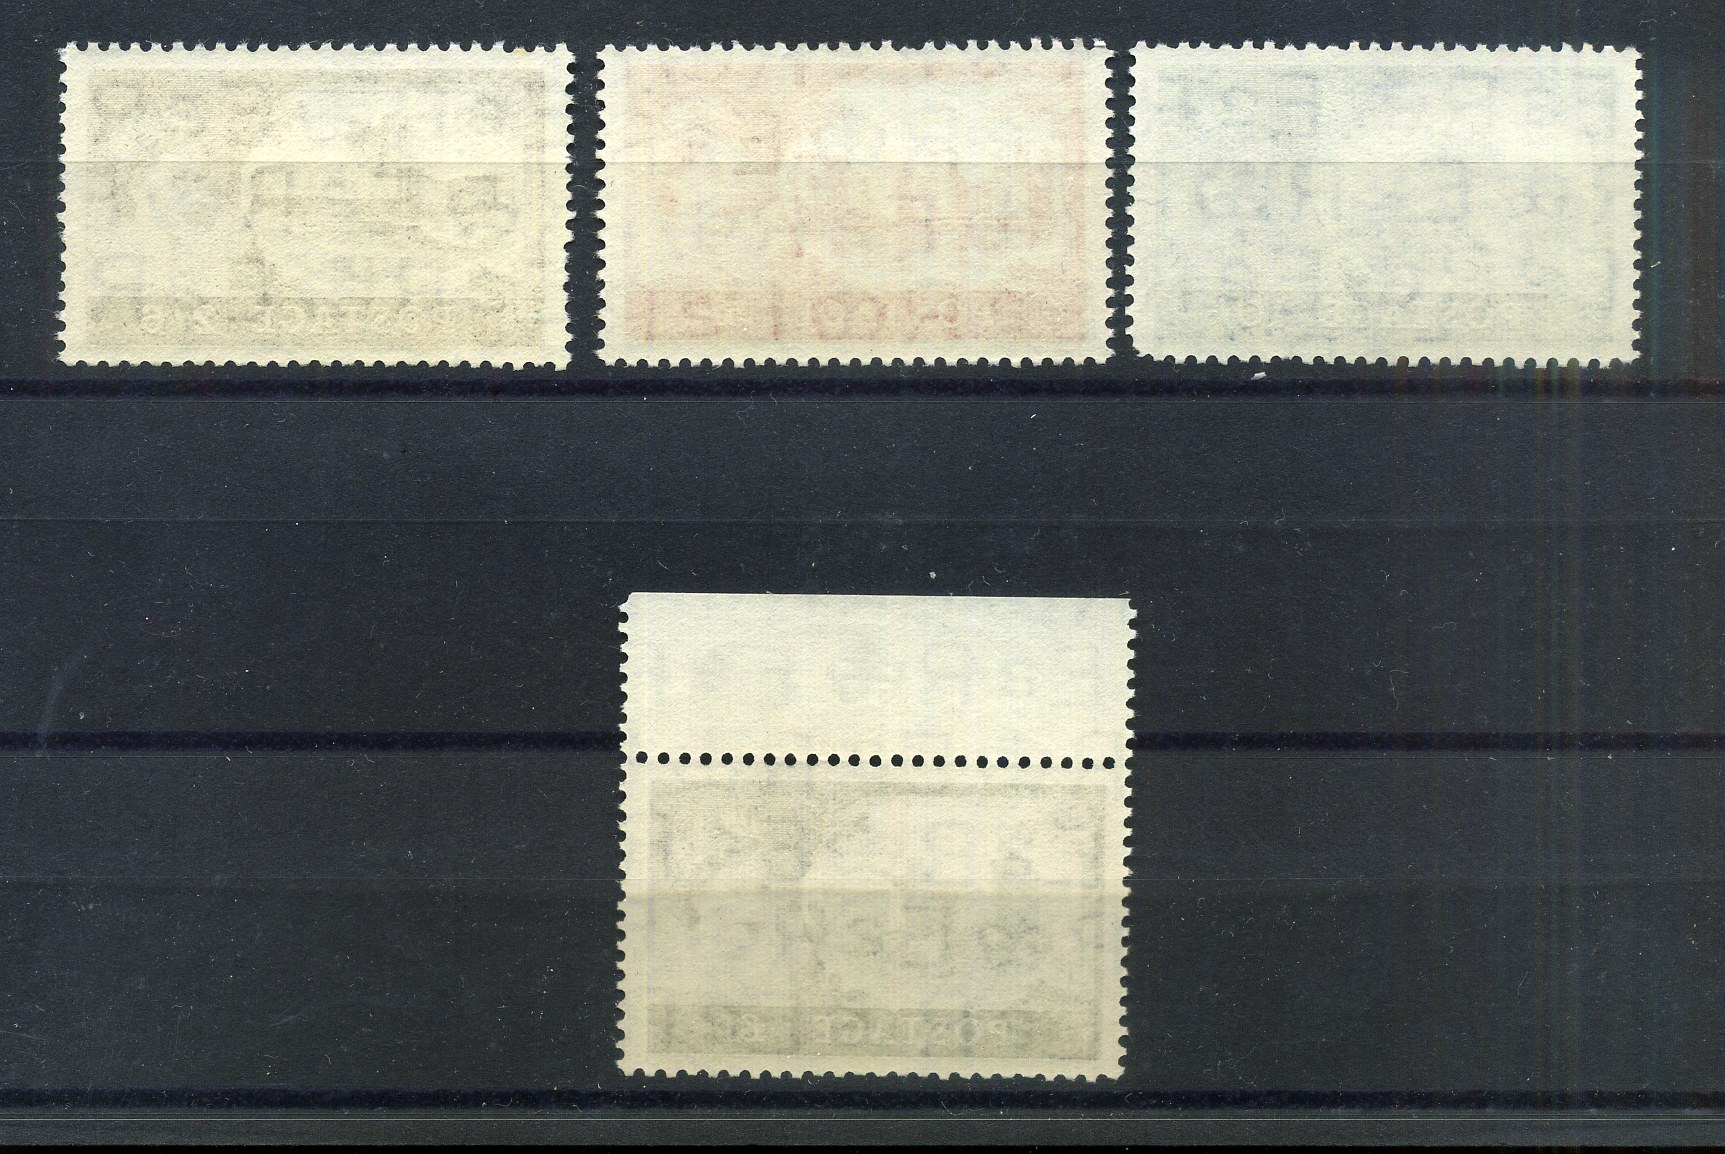 GB STAMPS 1958 1st De La Rue Castle High values (4v). Unmounted mint set of this scarce issue.( - Image 2 of 2